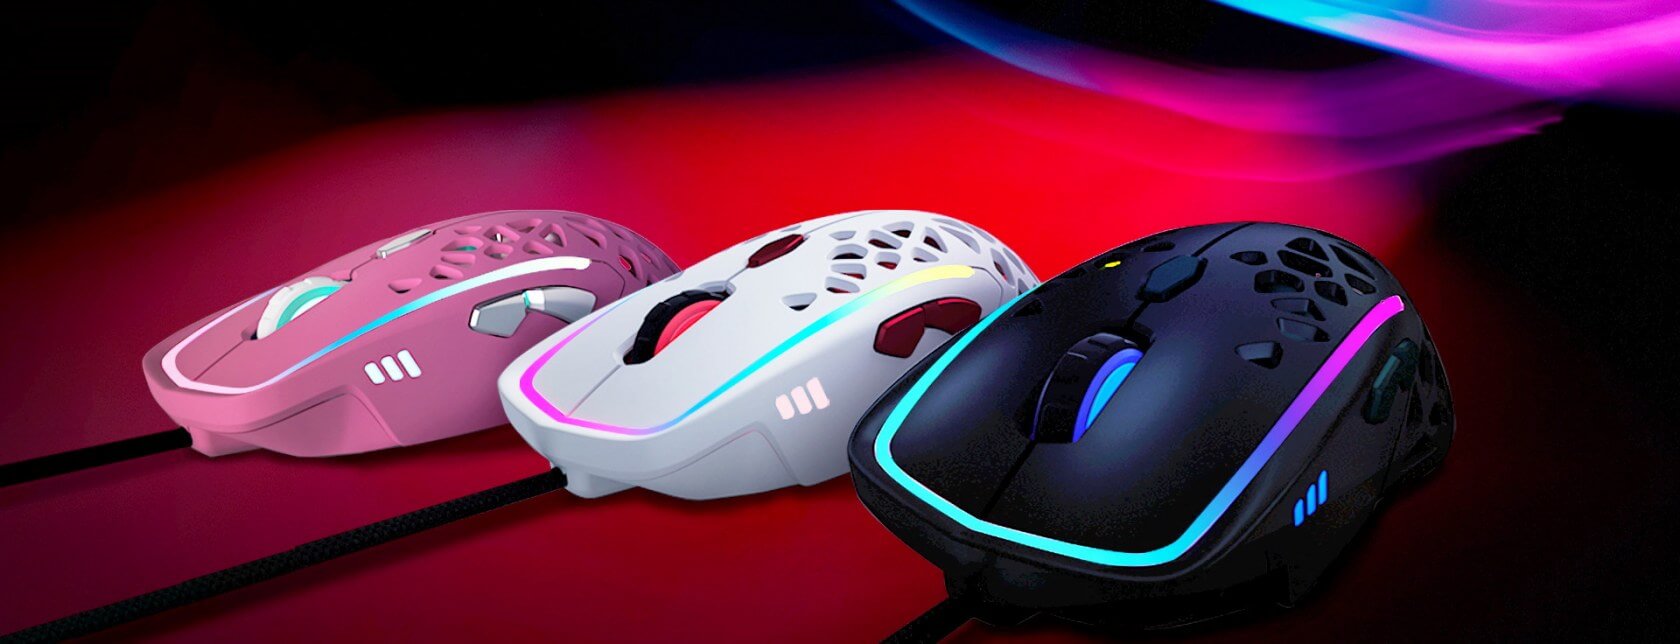 The 'Zephyr' gaming mouse has a built-in fan to eliminate 'sweaty palms'